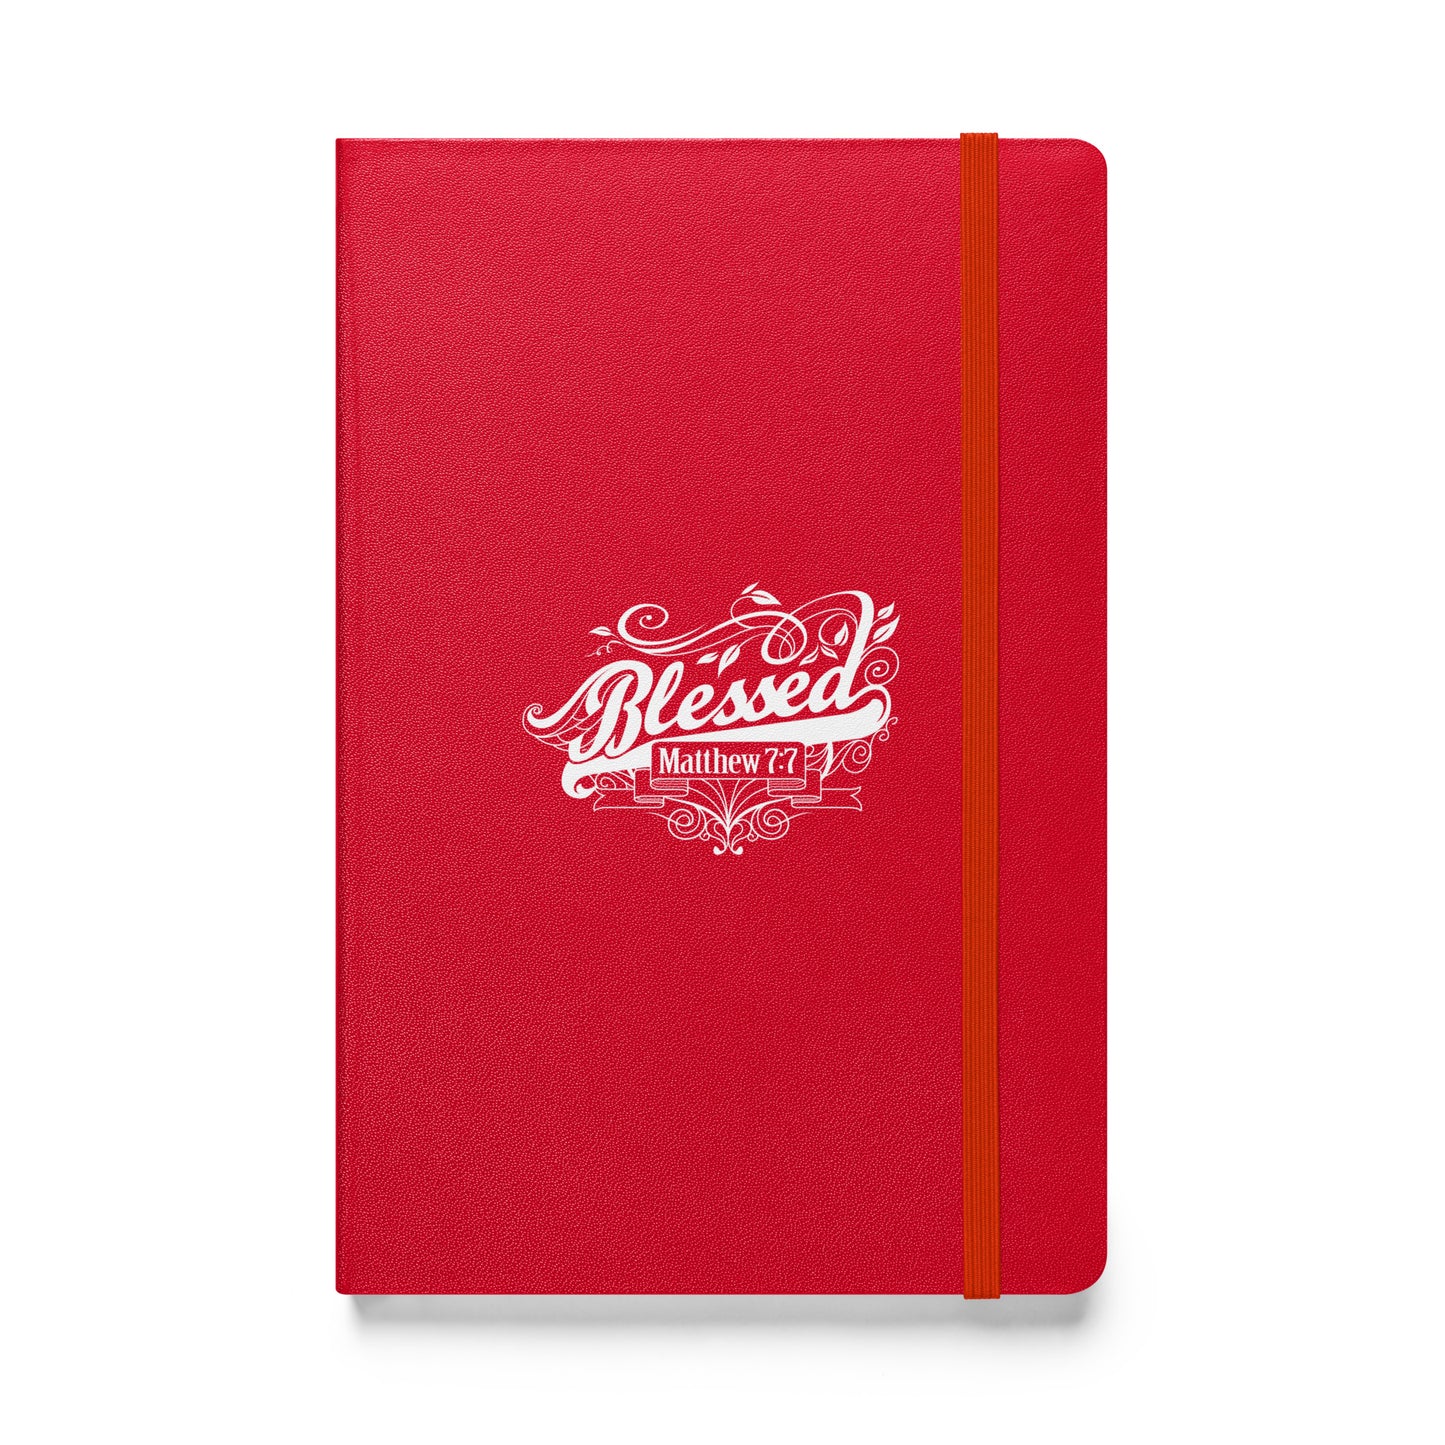 Blessed - Hardcover bound notebook - View All Colors